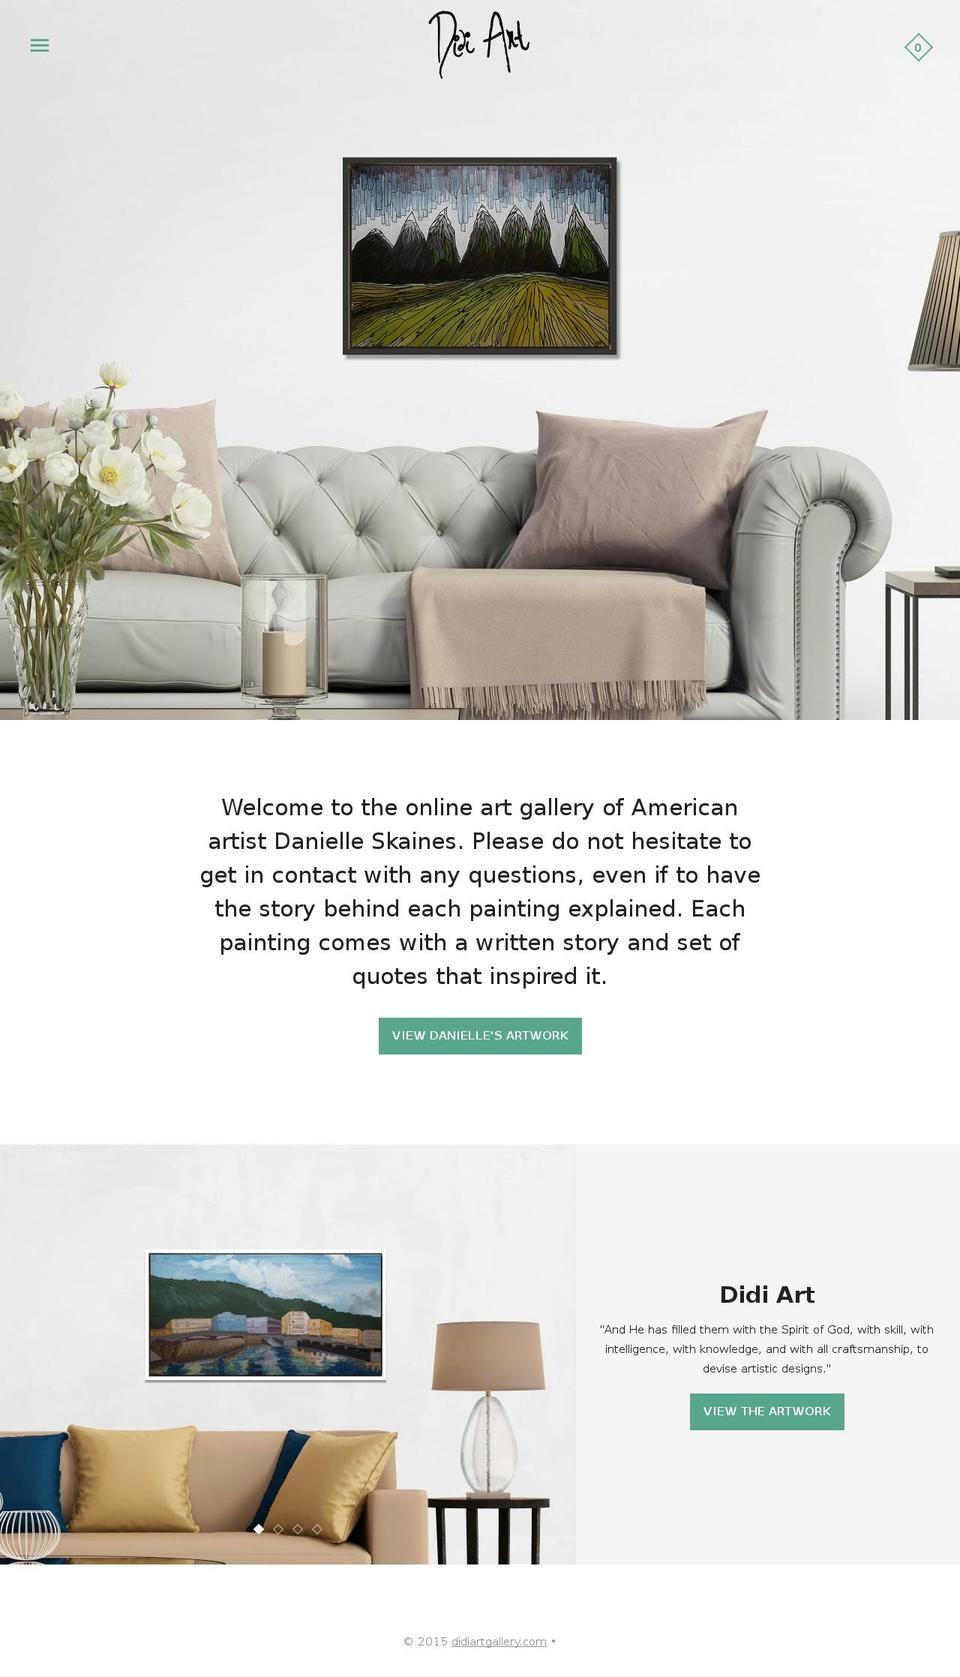 mosaic Shopify theme site example didiartgallery.com